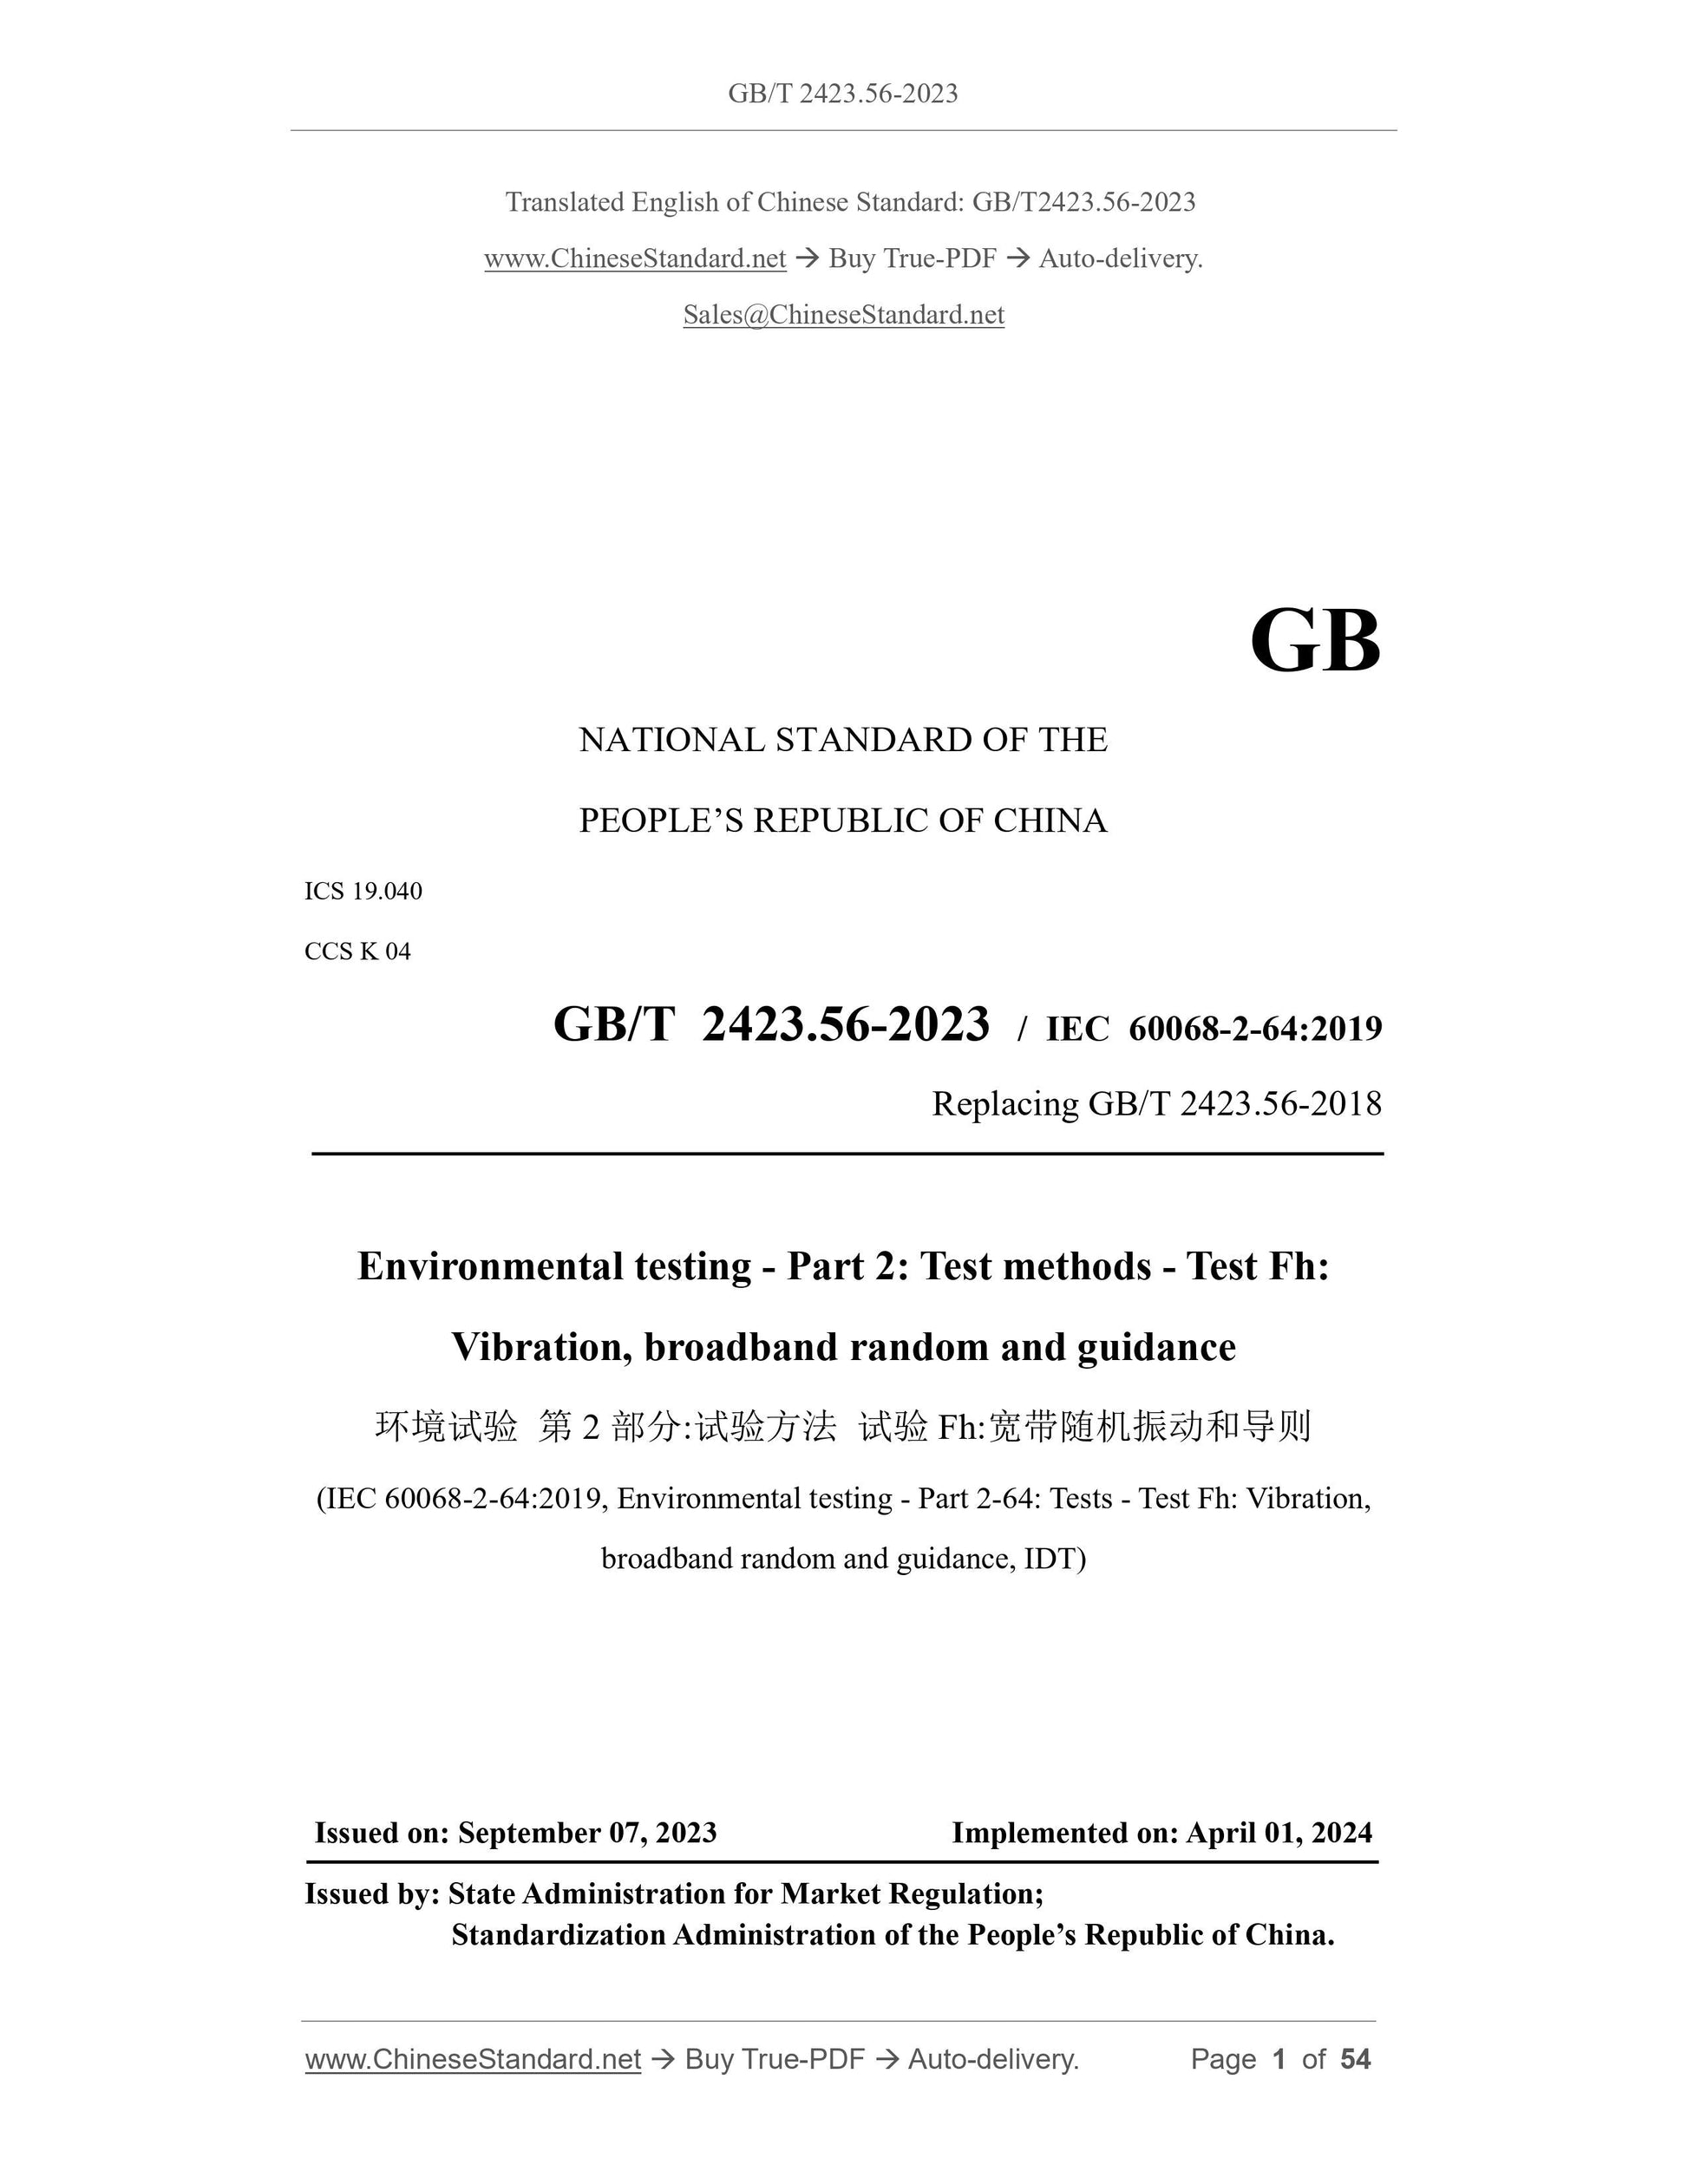 GB/T 2423.56-2023 Page 1